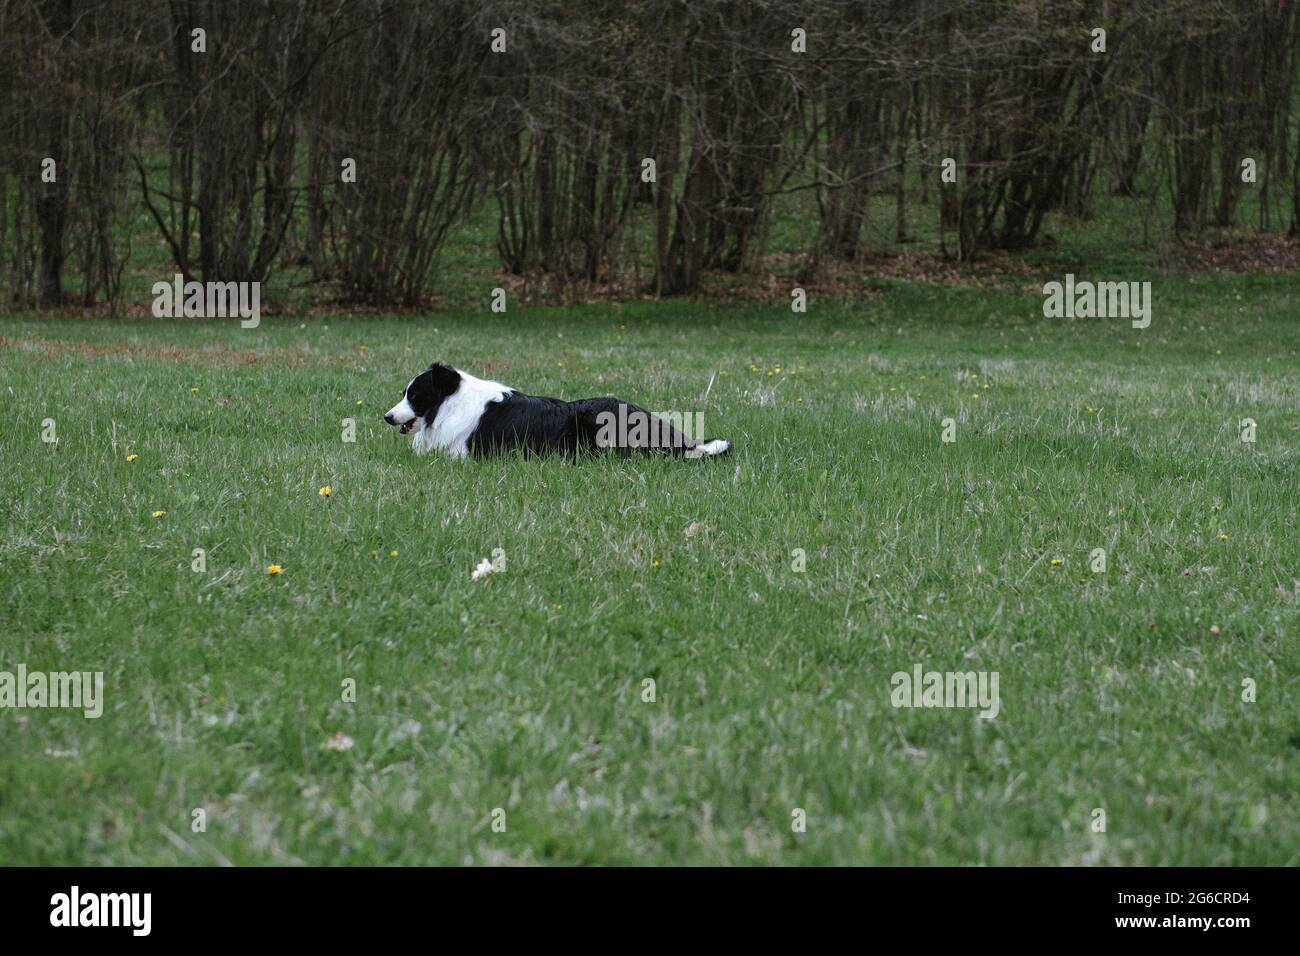 Black and white border collie dog laying on the grass Stock Photo